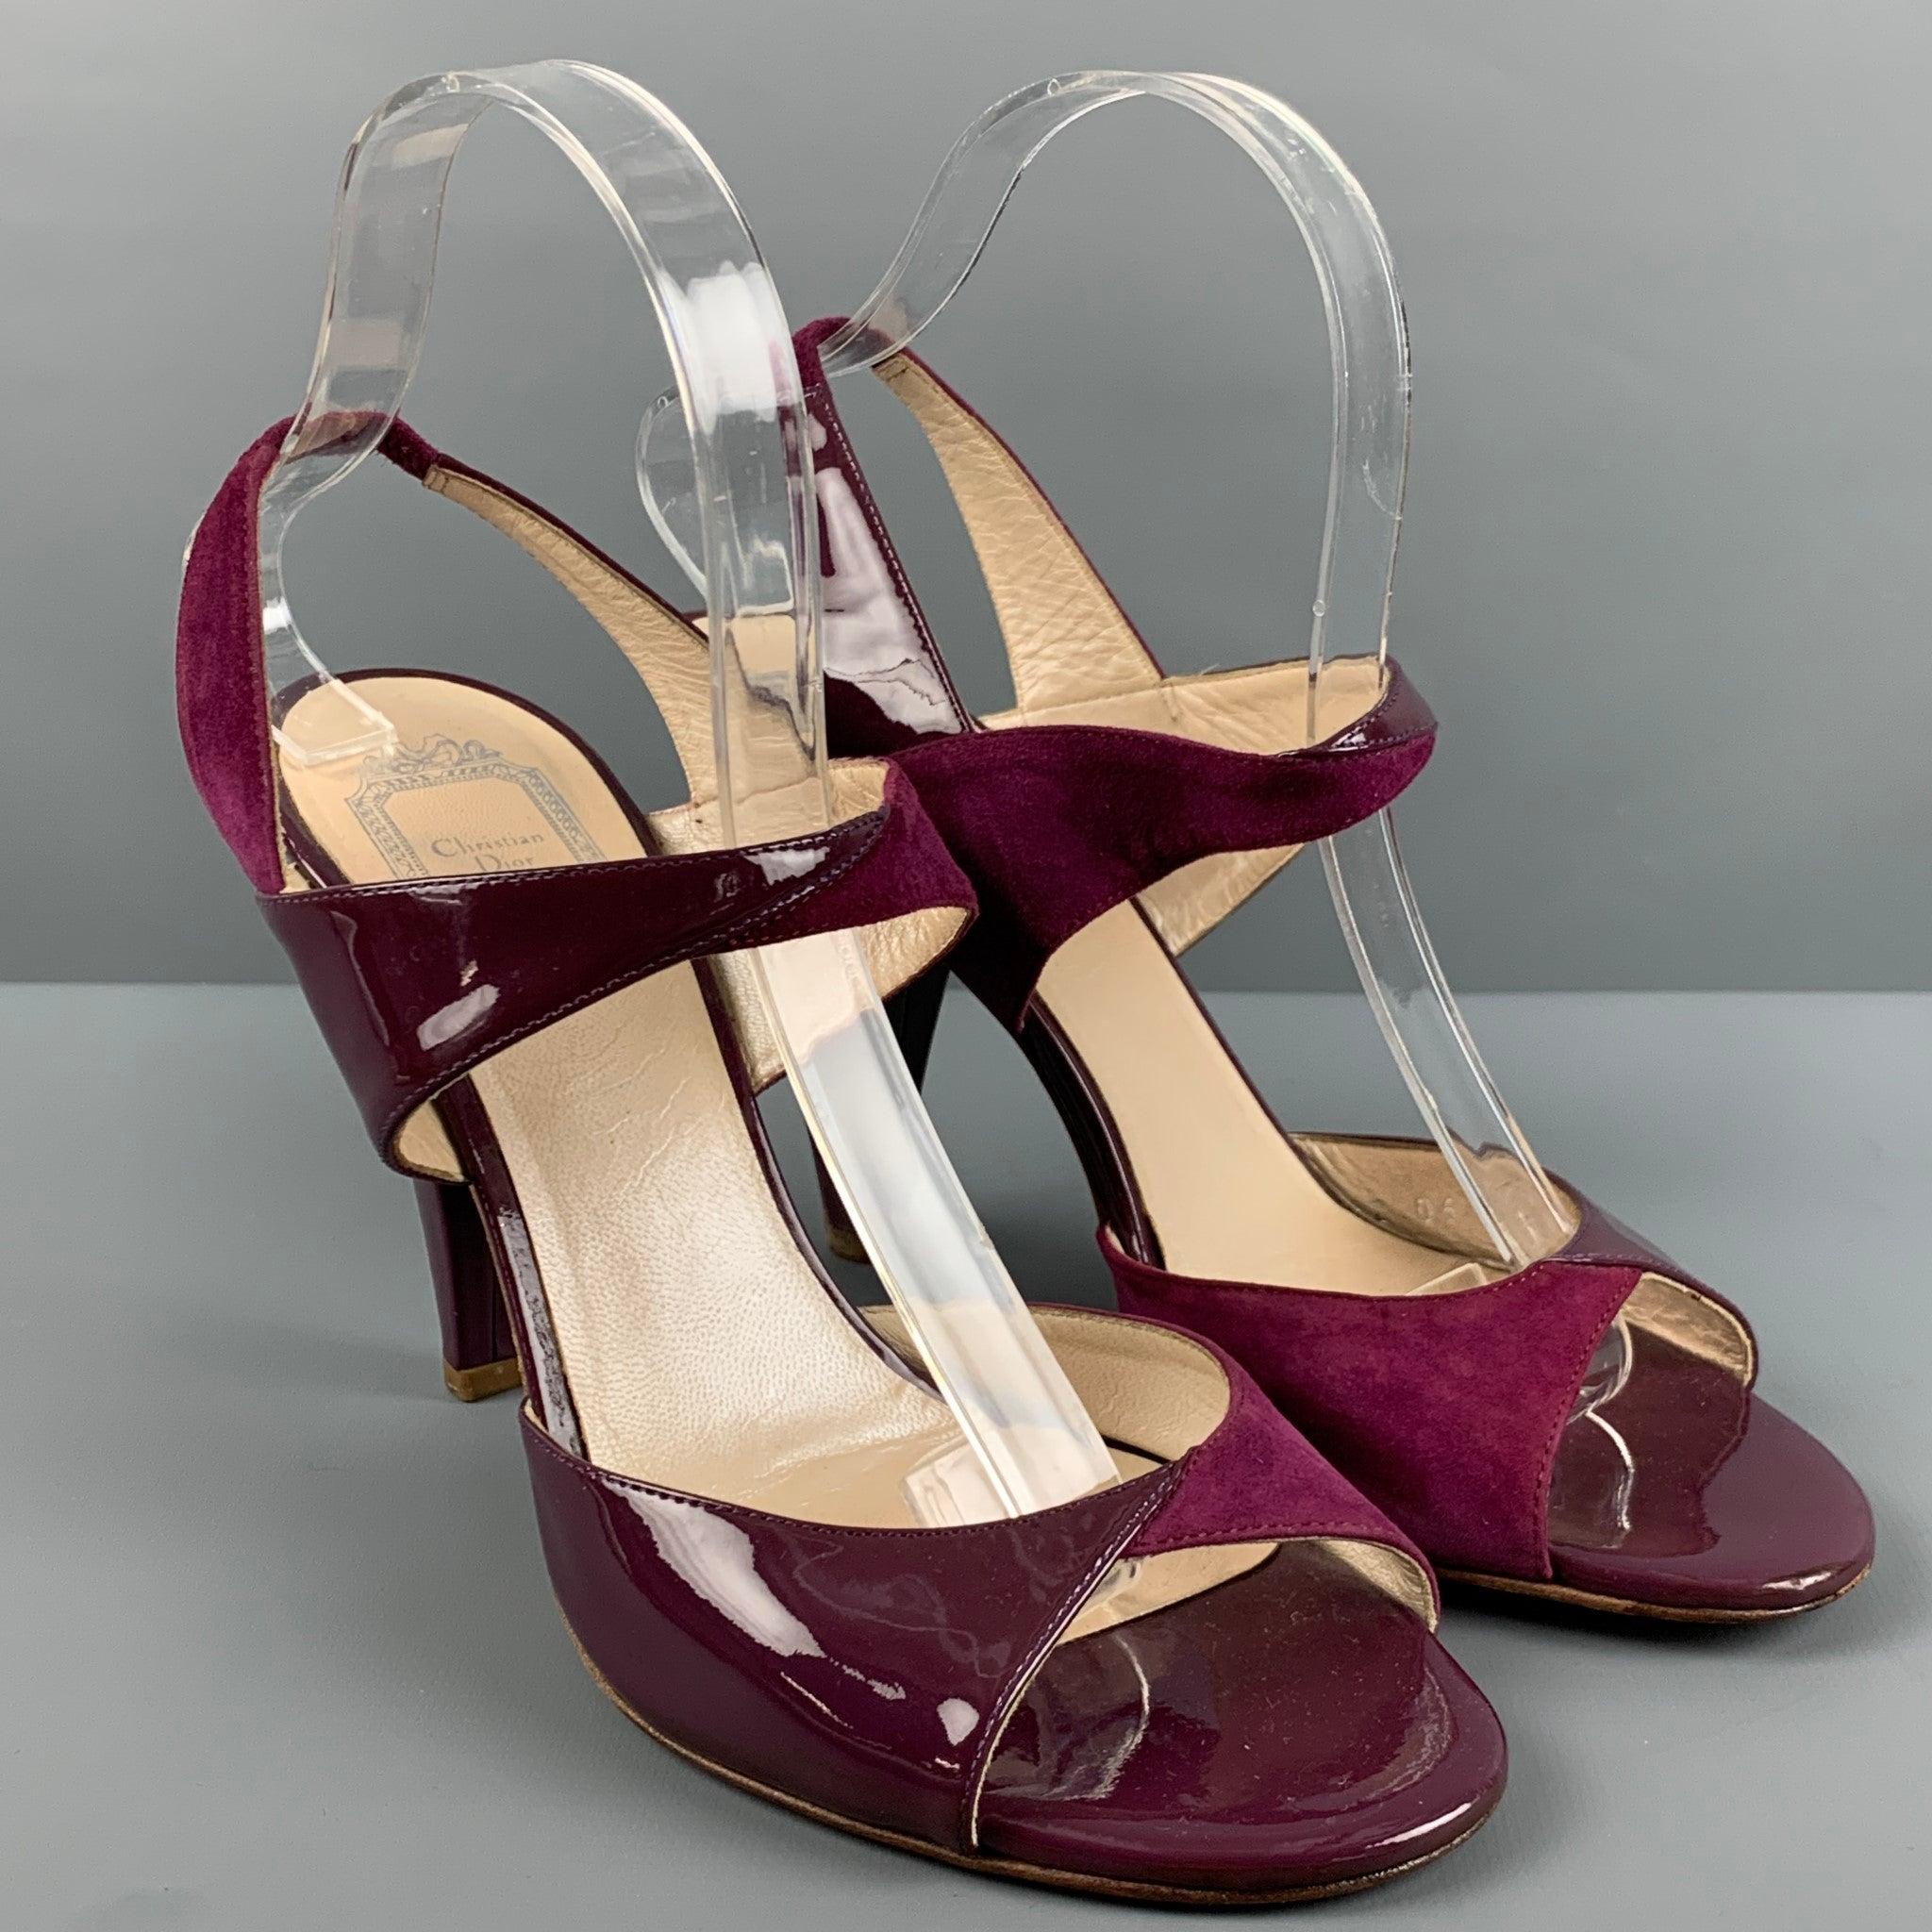 CHRISTIAN DIOR
sandals come in purple leather featuring a contrast material suede and patent leather, chunky heel, and elastic strap ankle. Made in Italy.Very Good Pre-Owned Condition. Moderate signs of wear. 

Marked:   12 06 BLHeel: 4.25 inches 
 